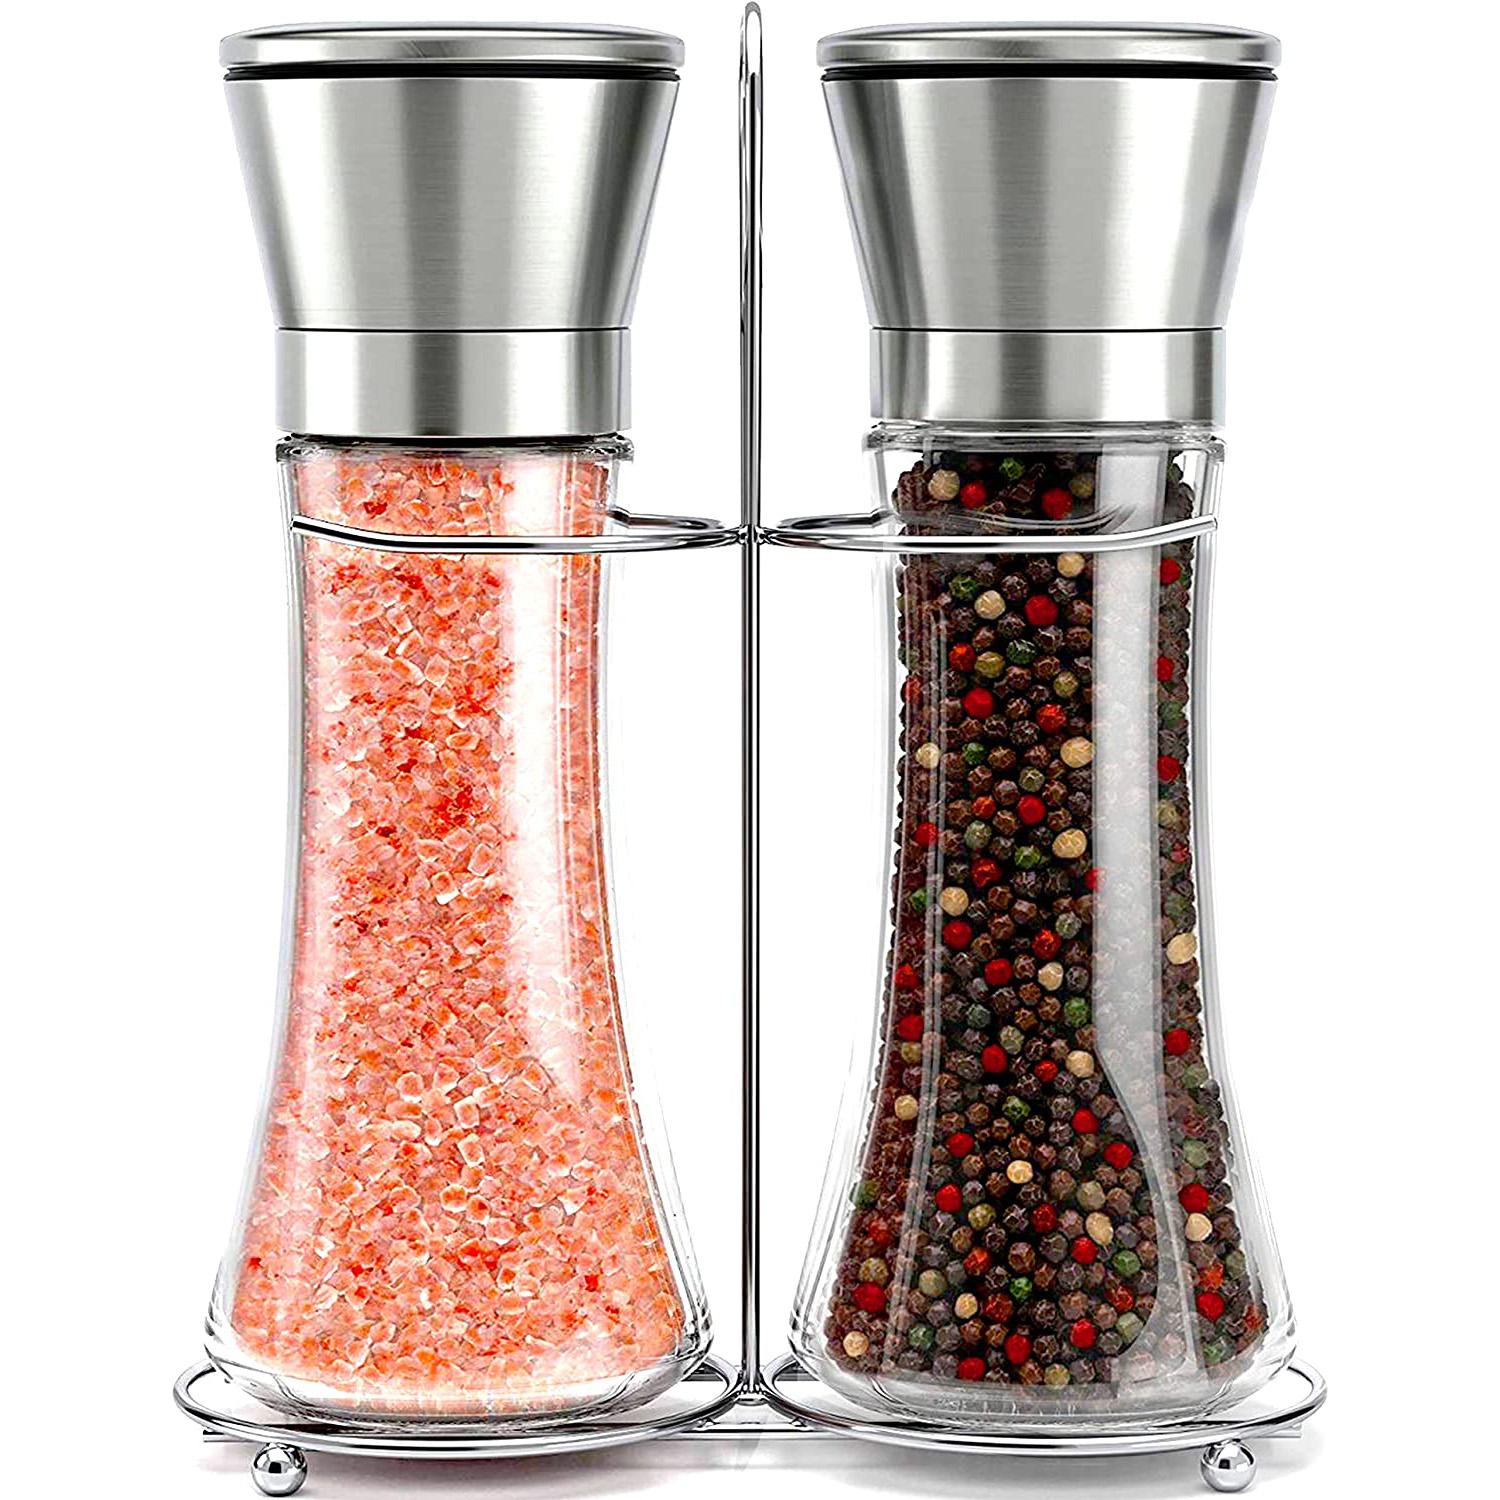 Willow and Everett Stainless Steel Salt and Pepper Grinder Set for $11.63